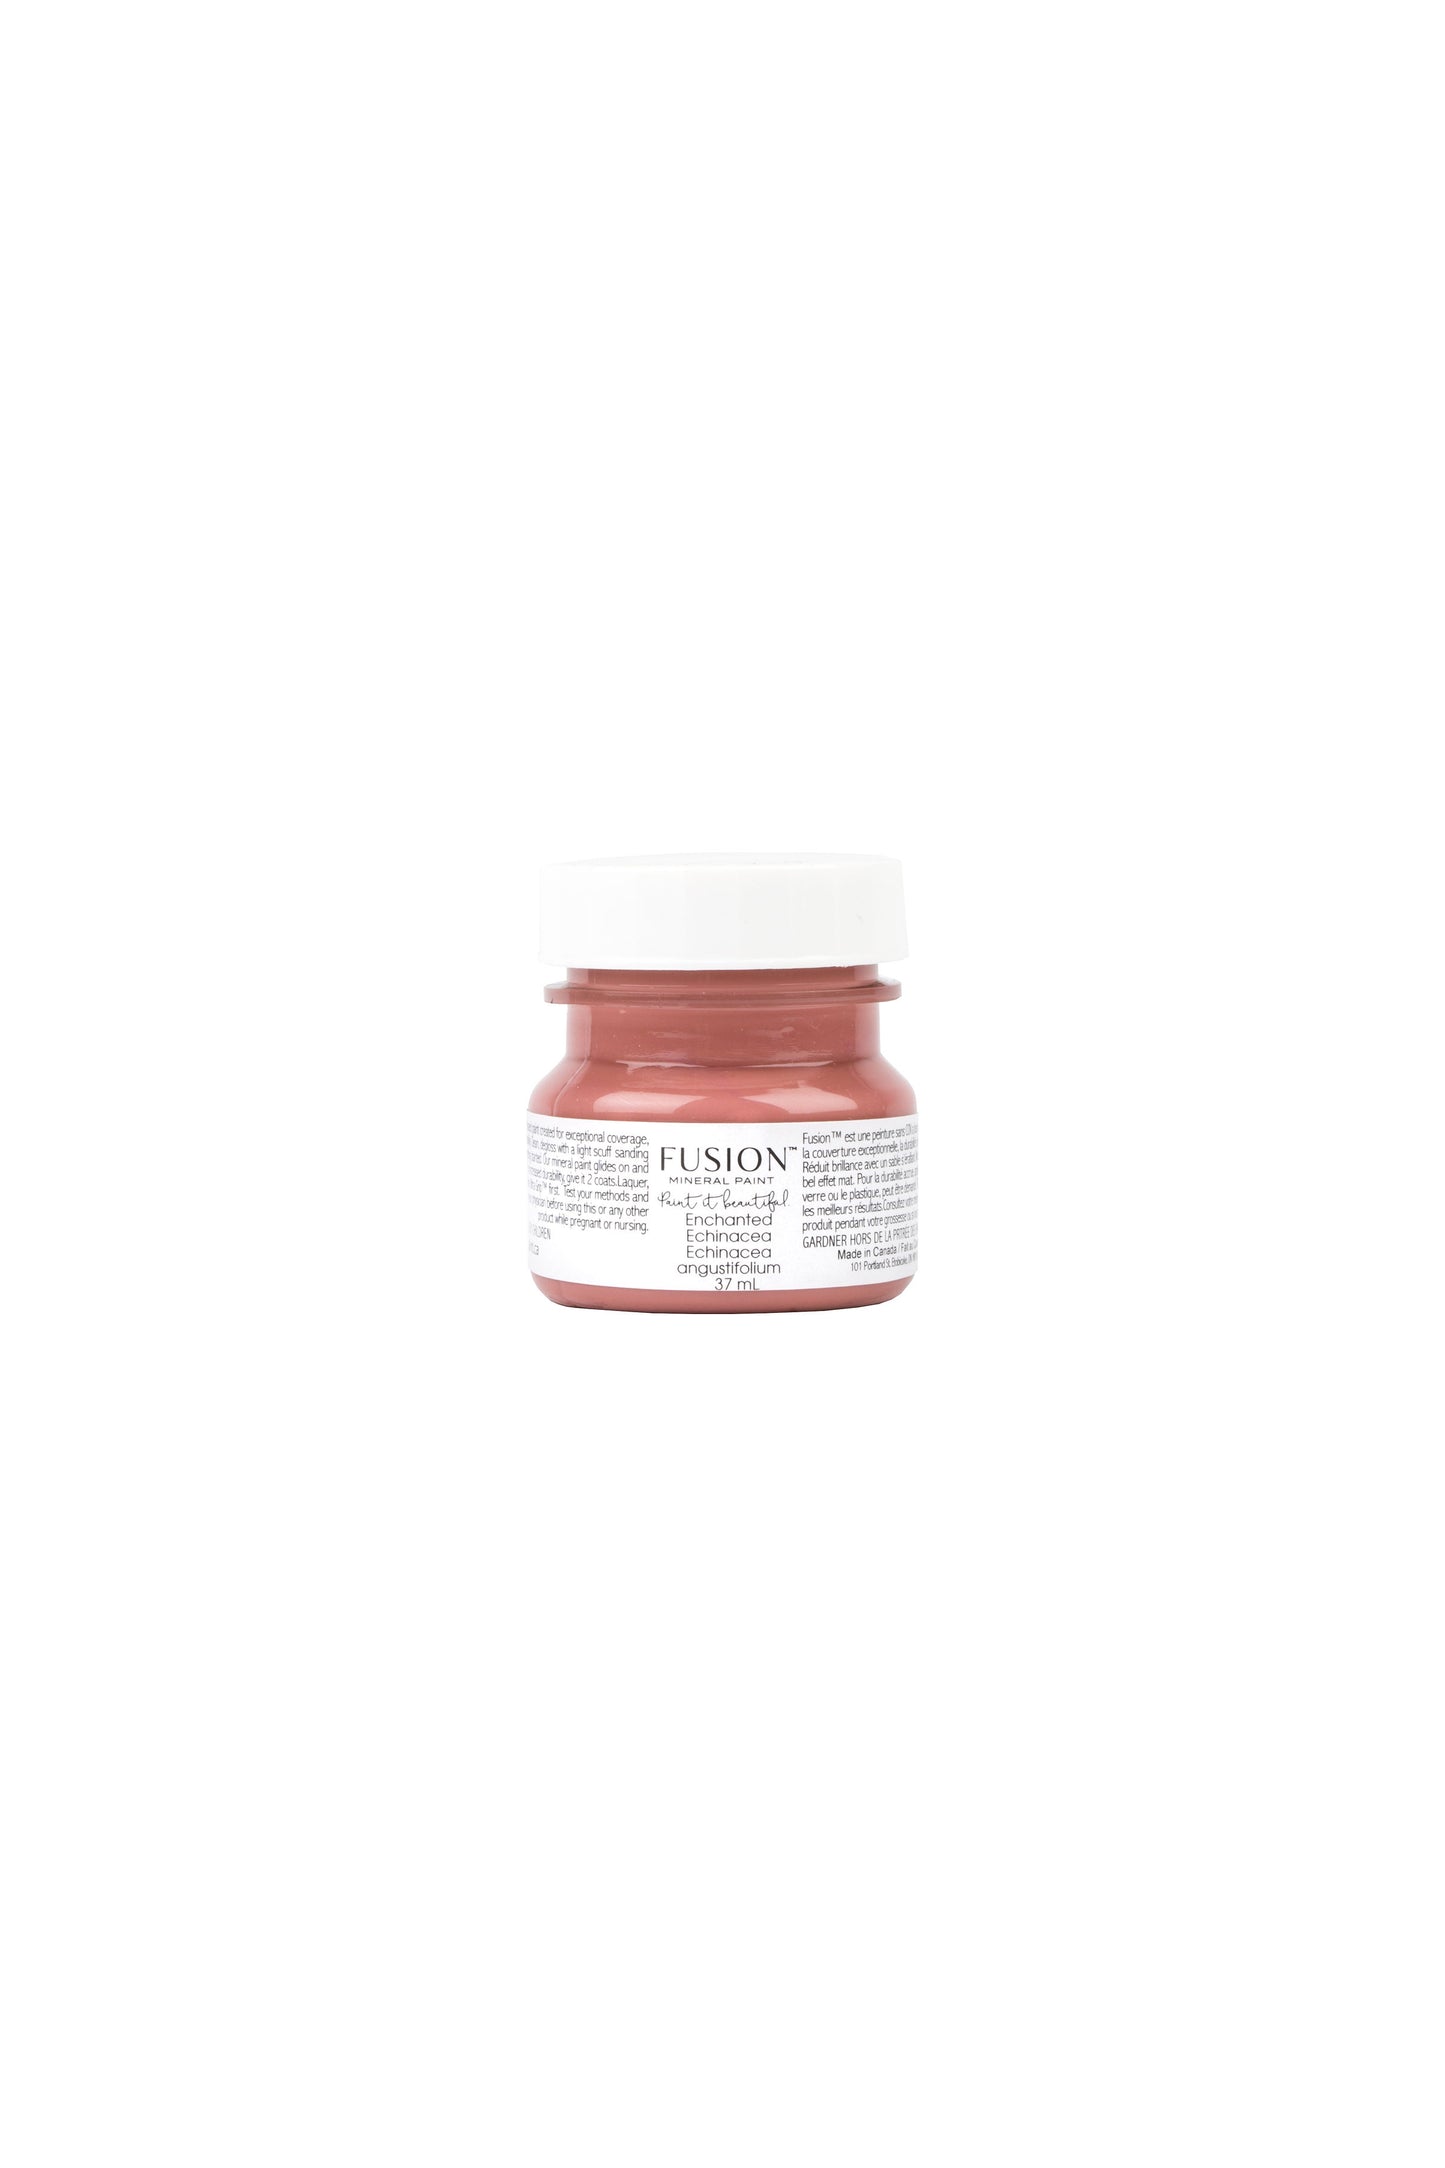 Enchanted Echinacea - Fusion Mineral Paint Paint > Fusion Mineral Paint > Furniture Paint 37ml